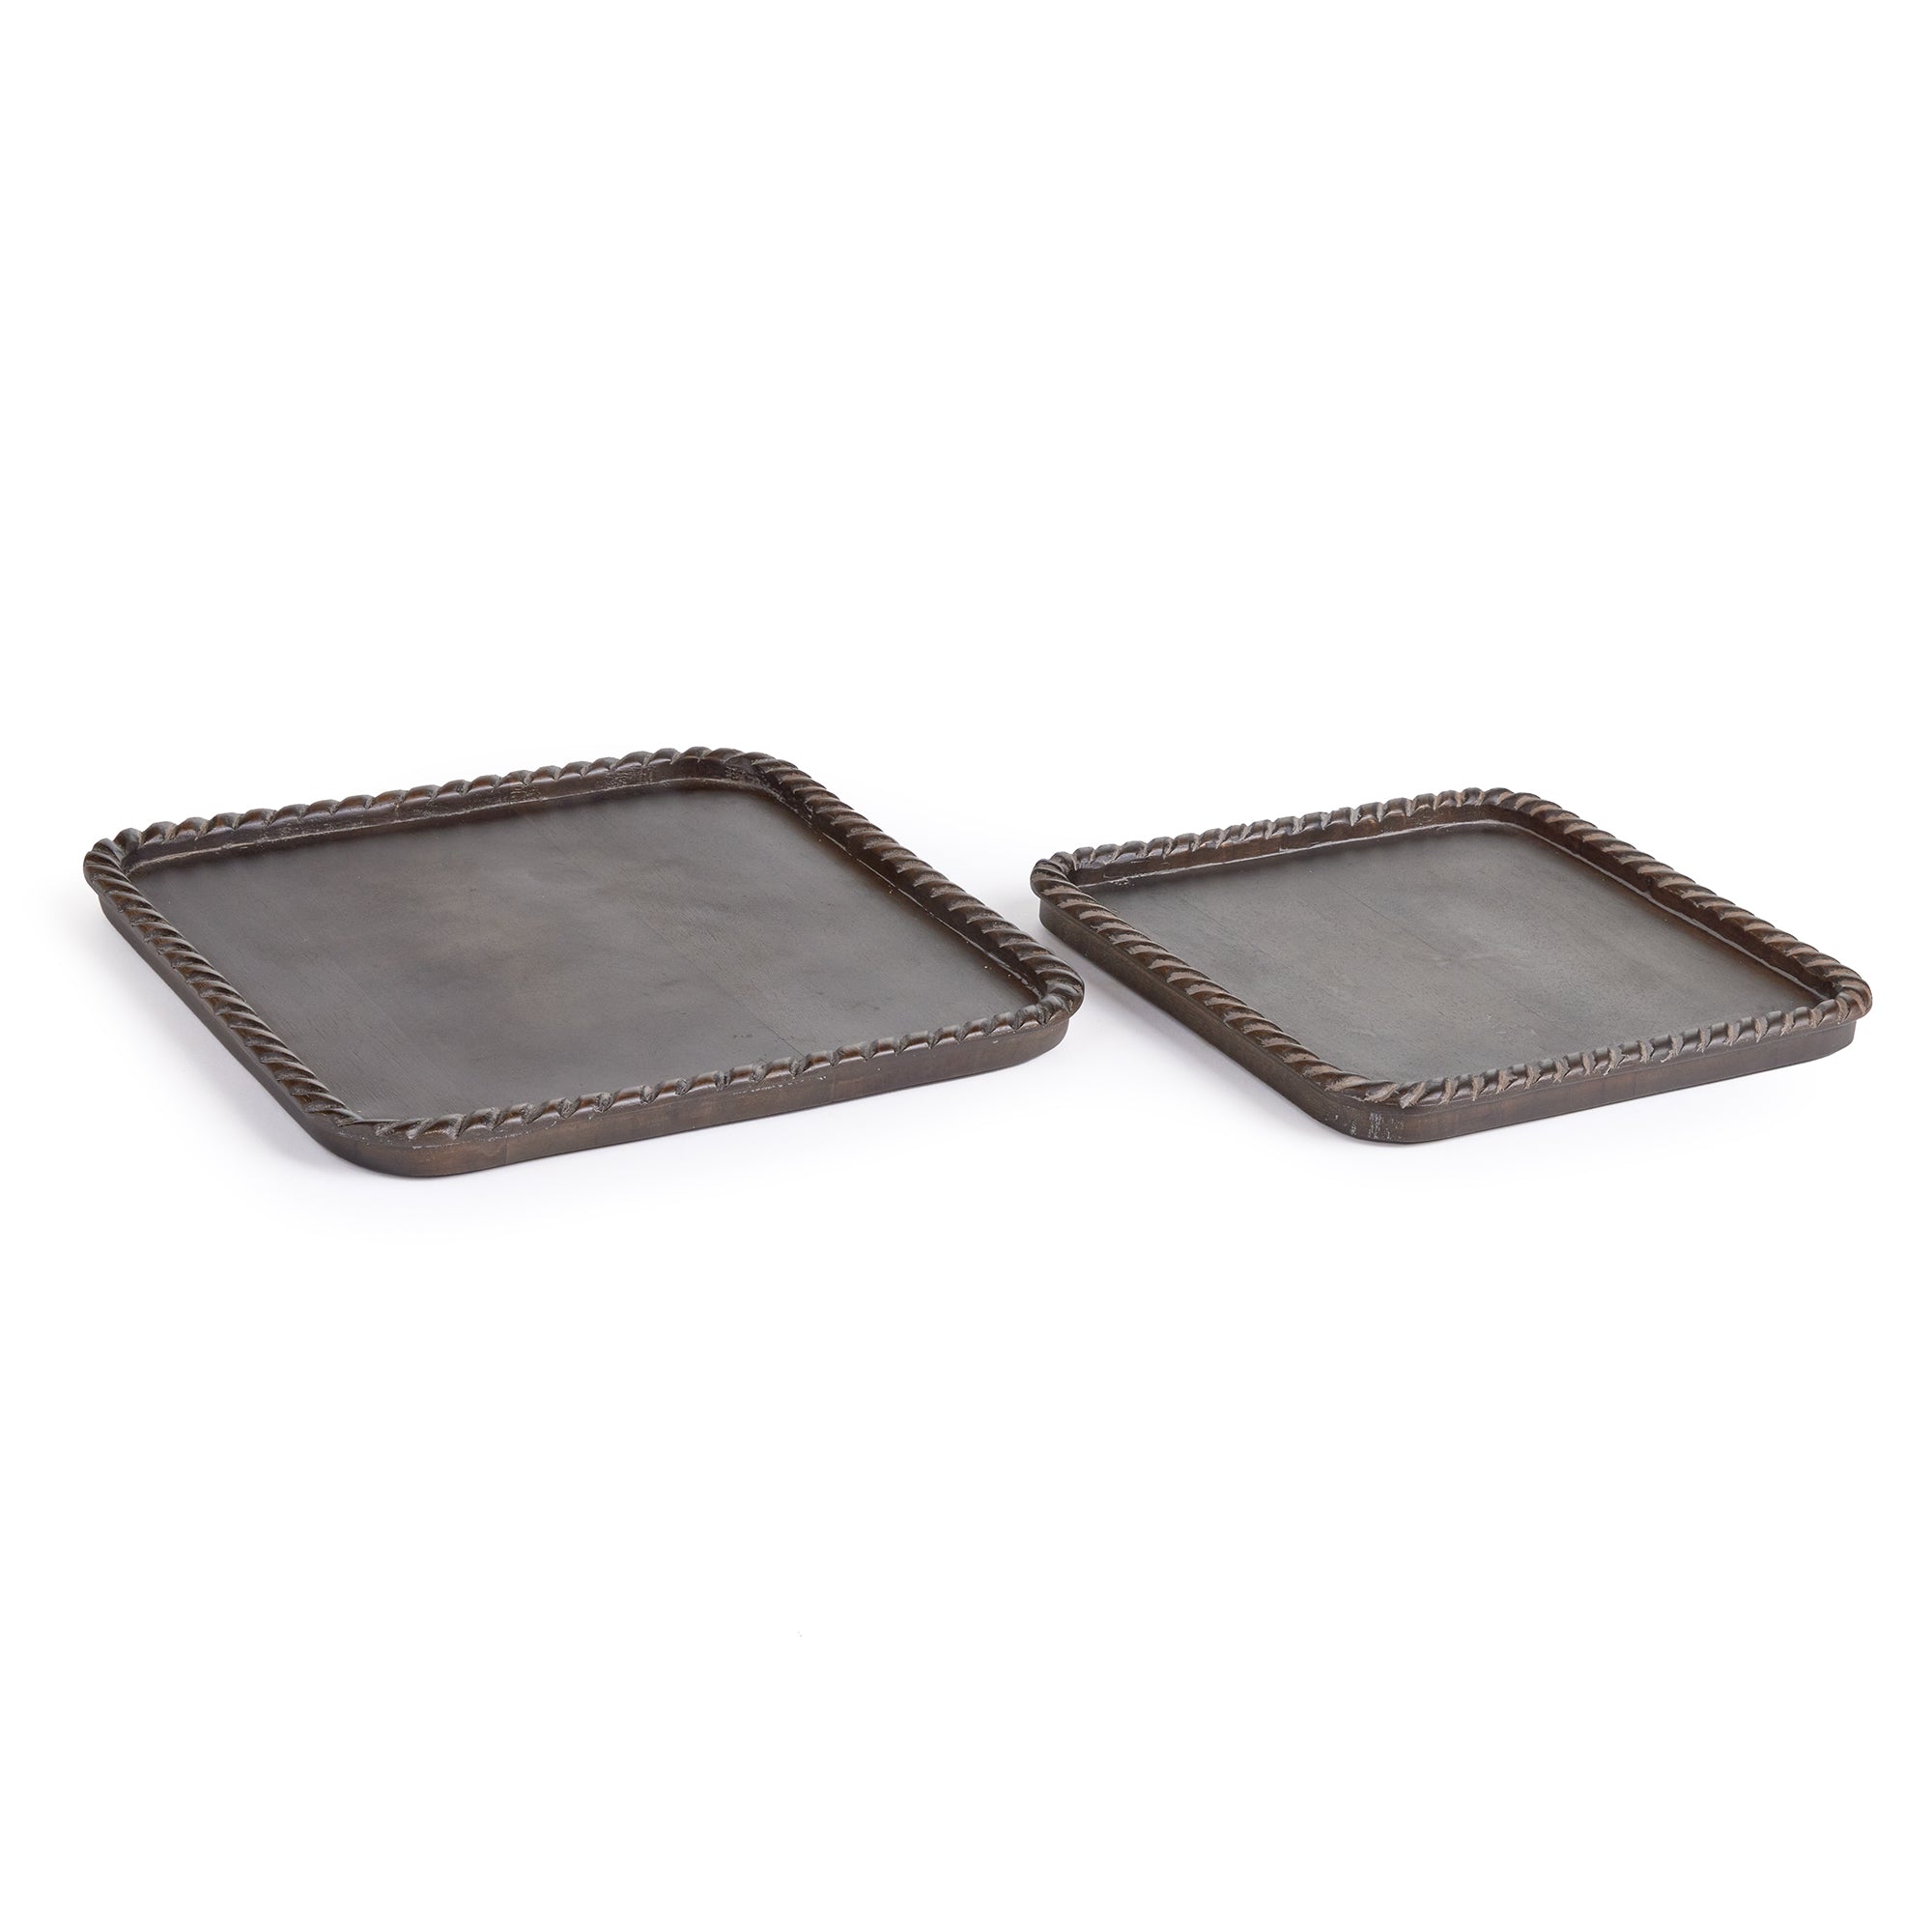 Hand carved from mango wood, this pair of trays is a sweet little accent for baked goods or a cheese tray. A little touch of natural wood tone is always on trend. Amethyst Home provides interior design, new construction, custom furniture, and area rugs in the Salt Lake City metro area.